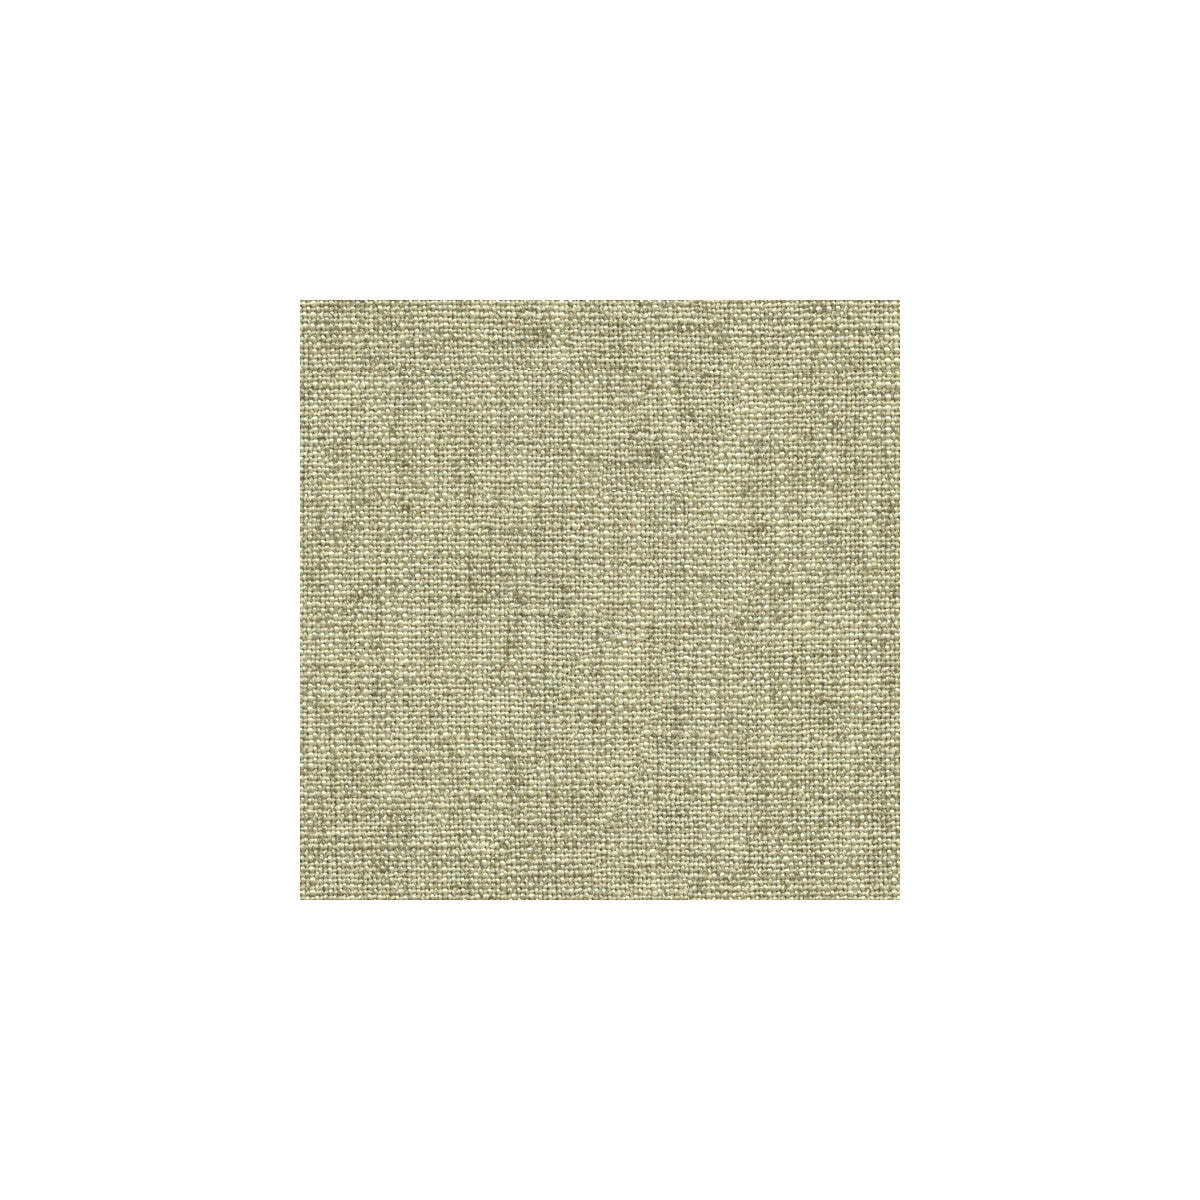 Denman fabric in stone color - pattern 33008.106.0 - by Kravet Basics in the Sarah Richardson Affinity collection